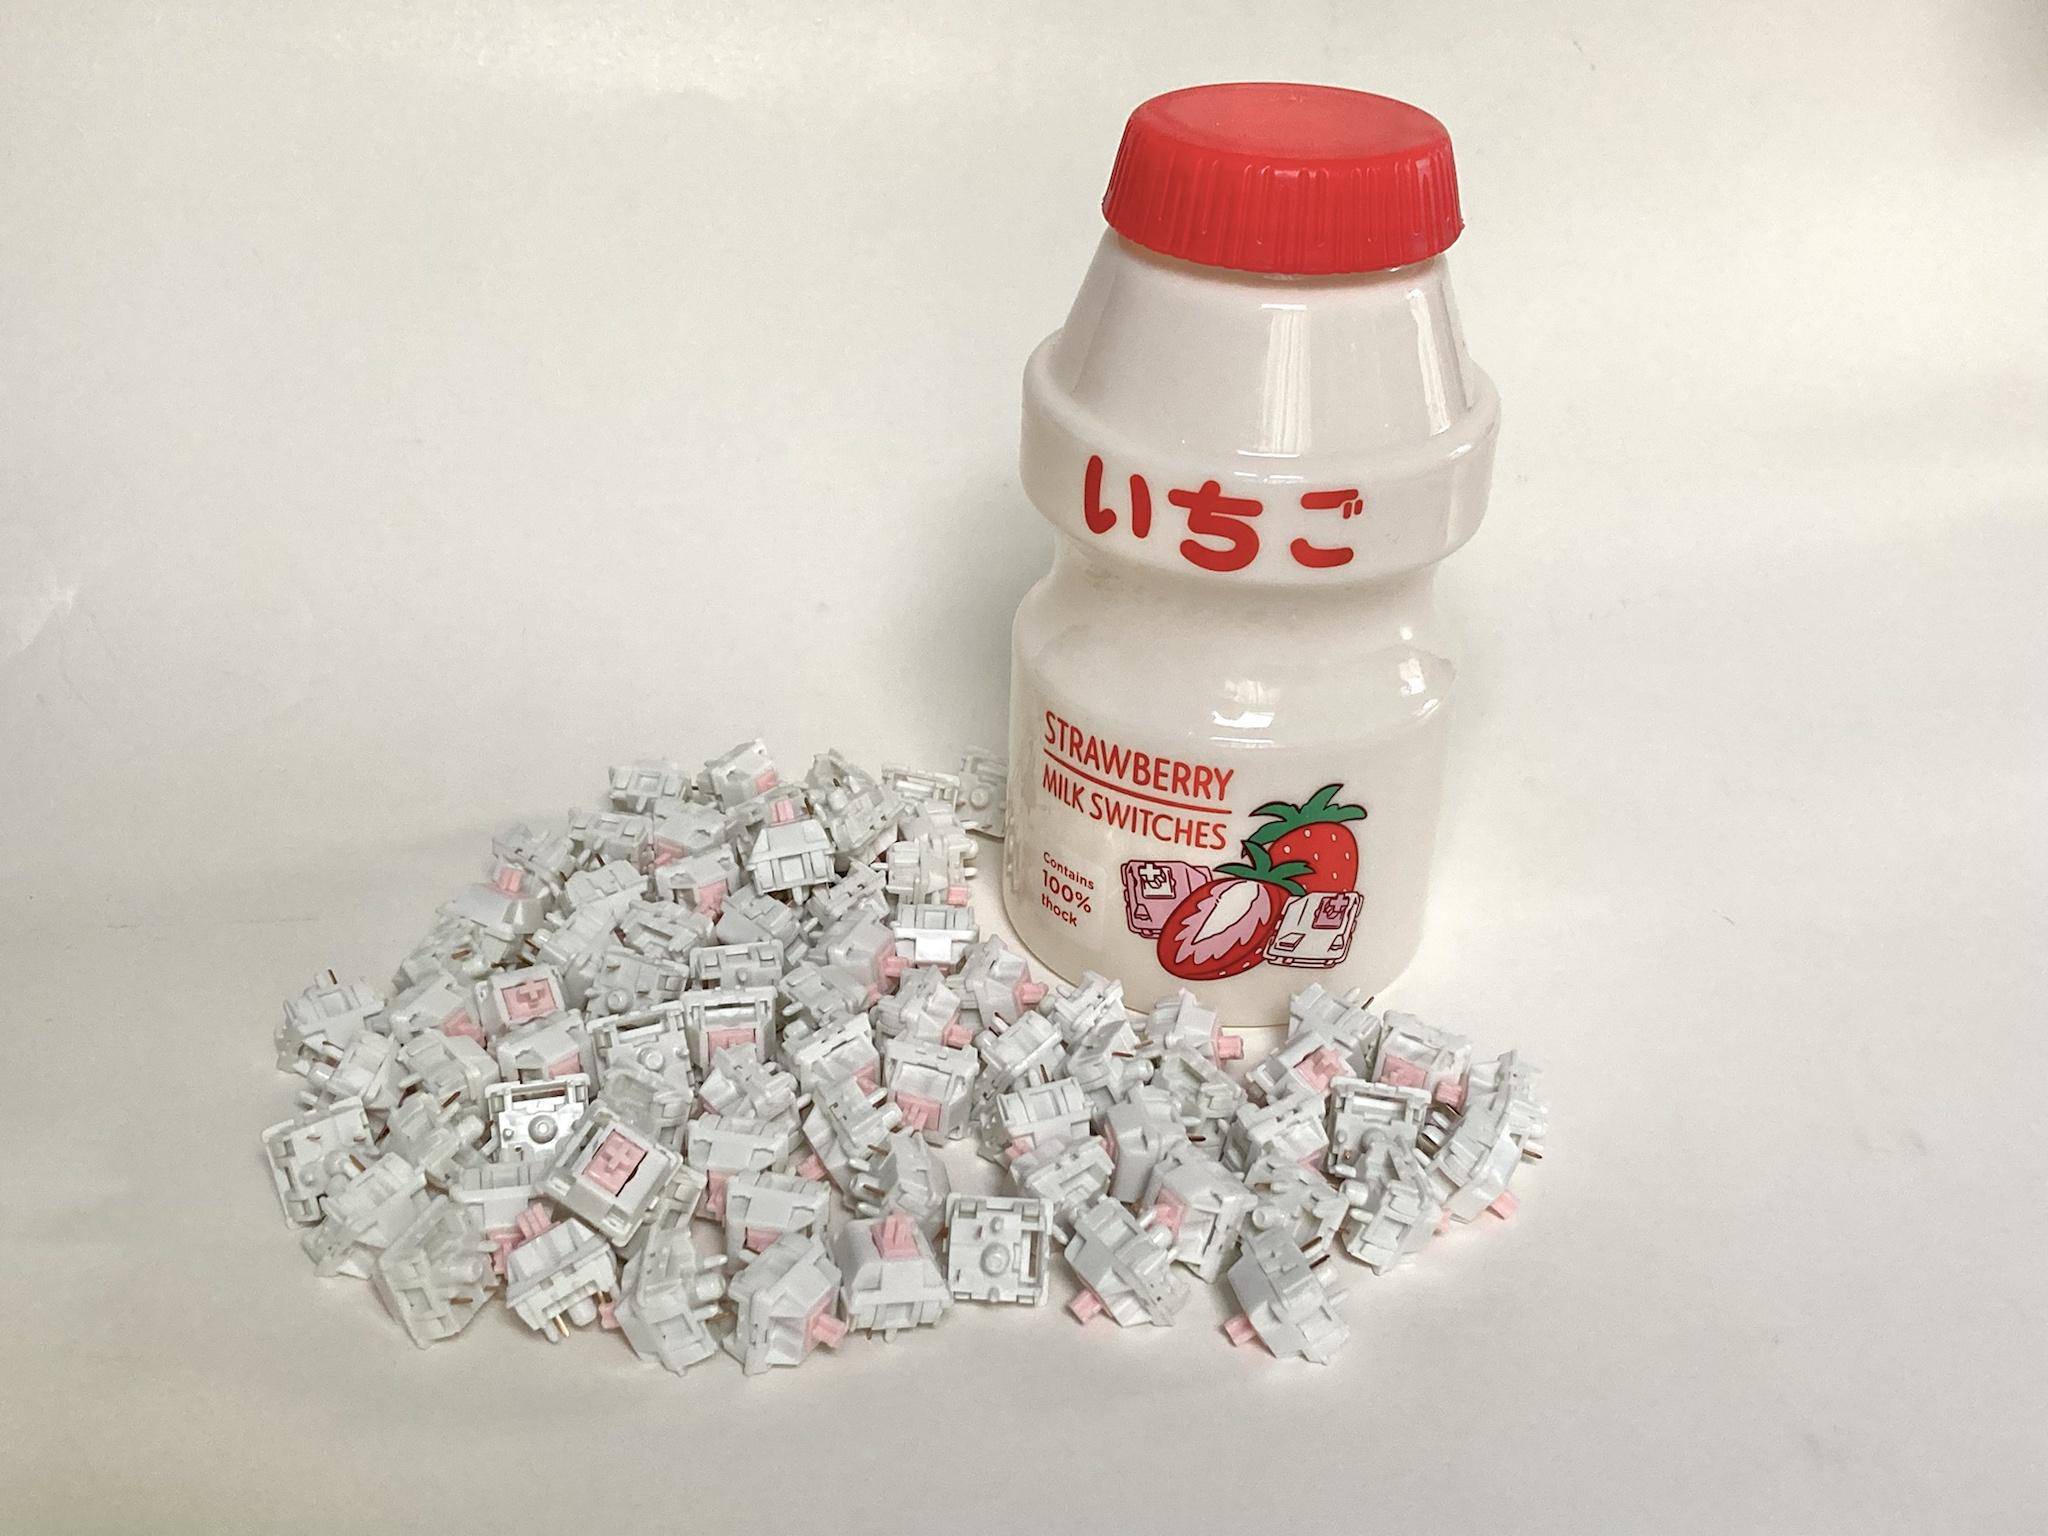 [KFA MARKETPLACE] (79) Tecsee Strawberry Milk switches in Milk Container - KeebsForAll